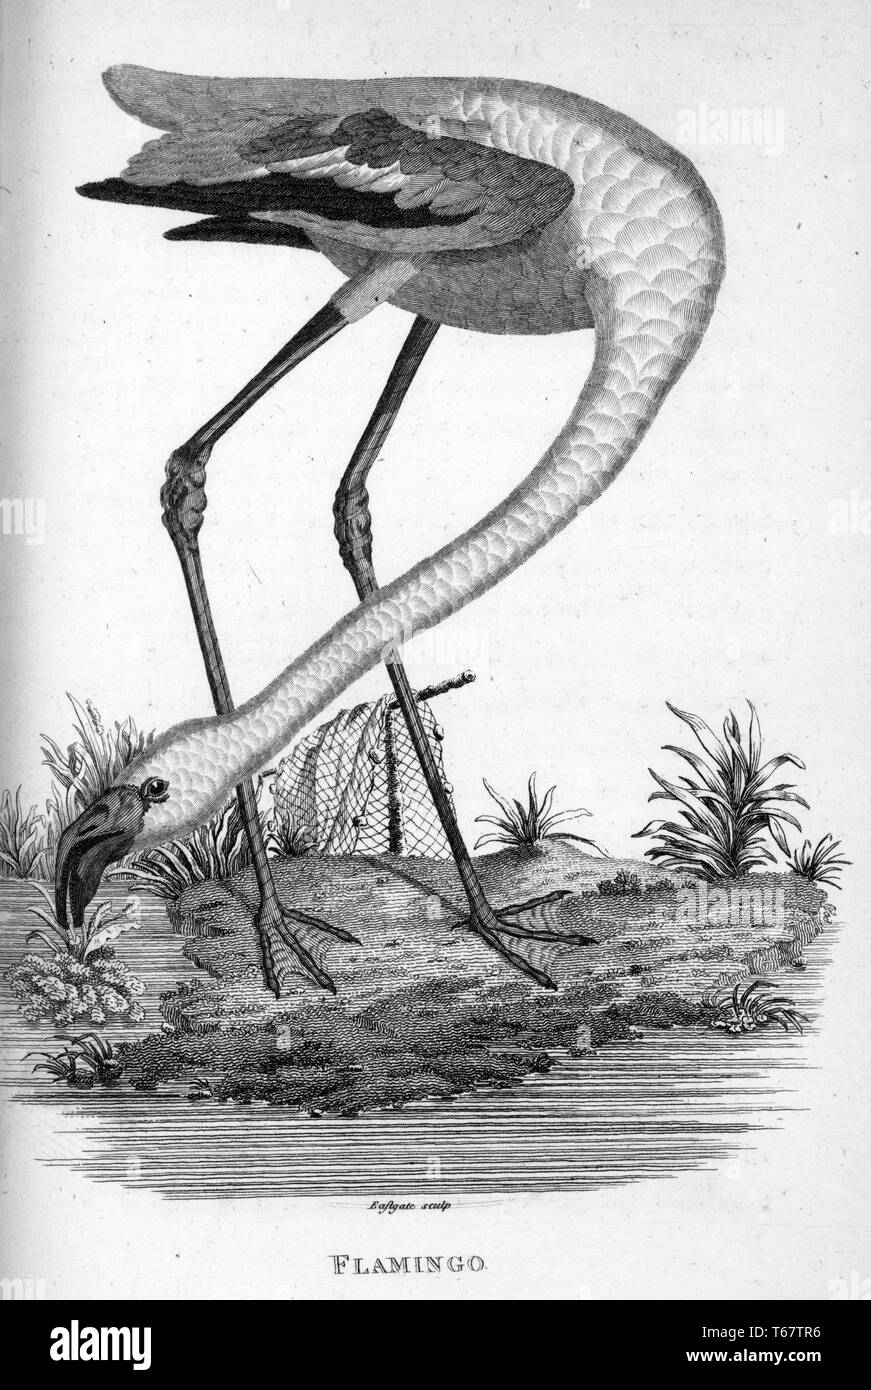 An engraving of a flamingo from the book 'Zoological Lectures Delivered at the Royal Institution' by George Shaw, 1809. From the New York Public Library. Stock Photo